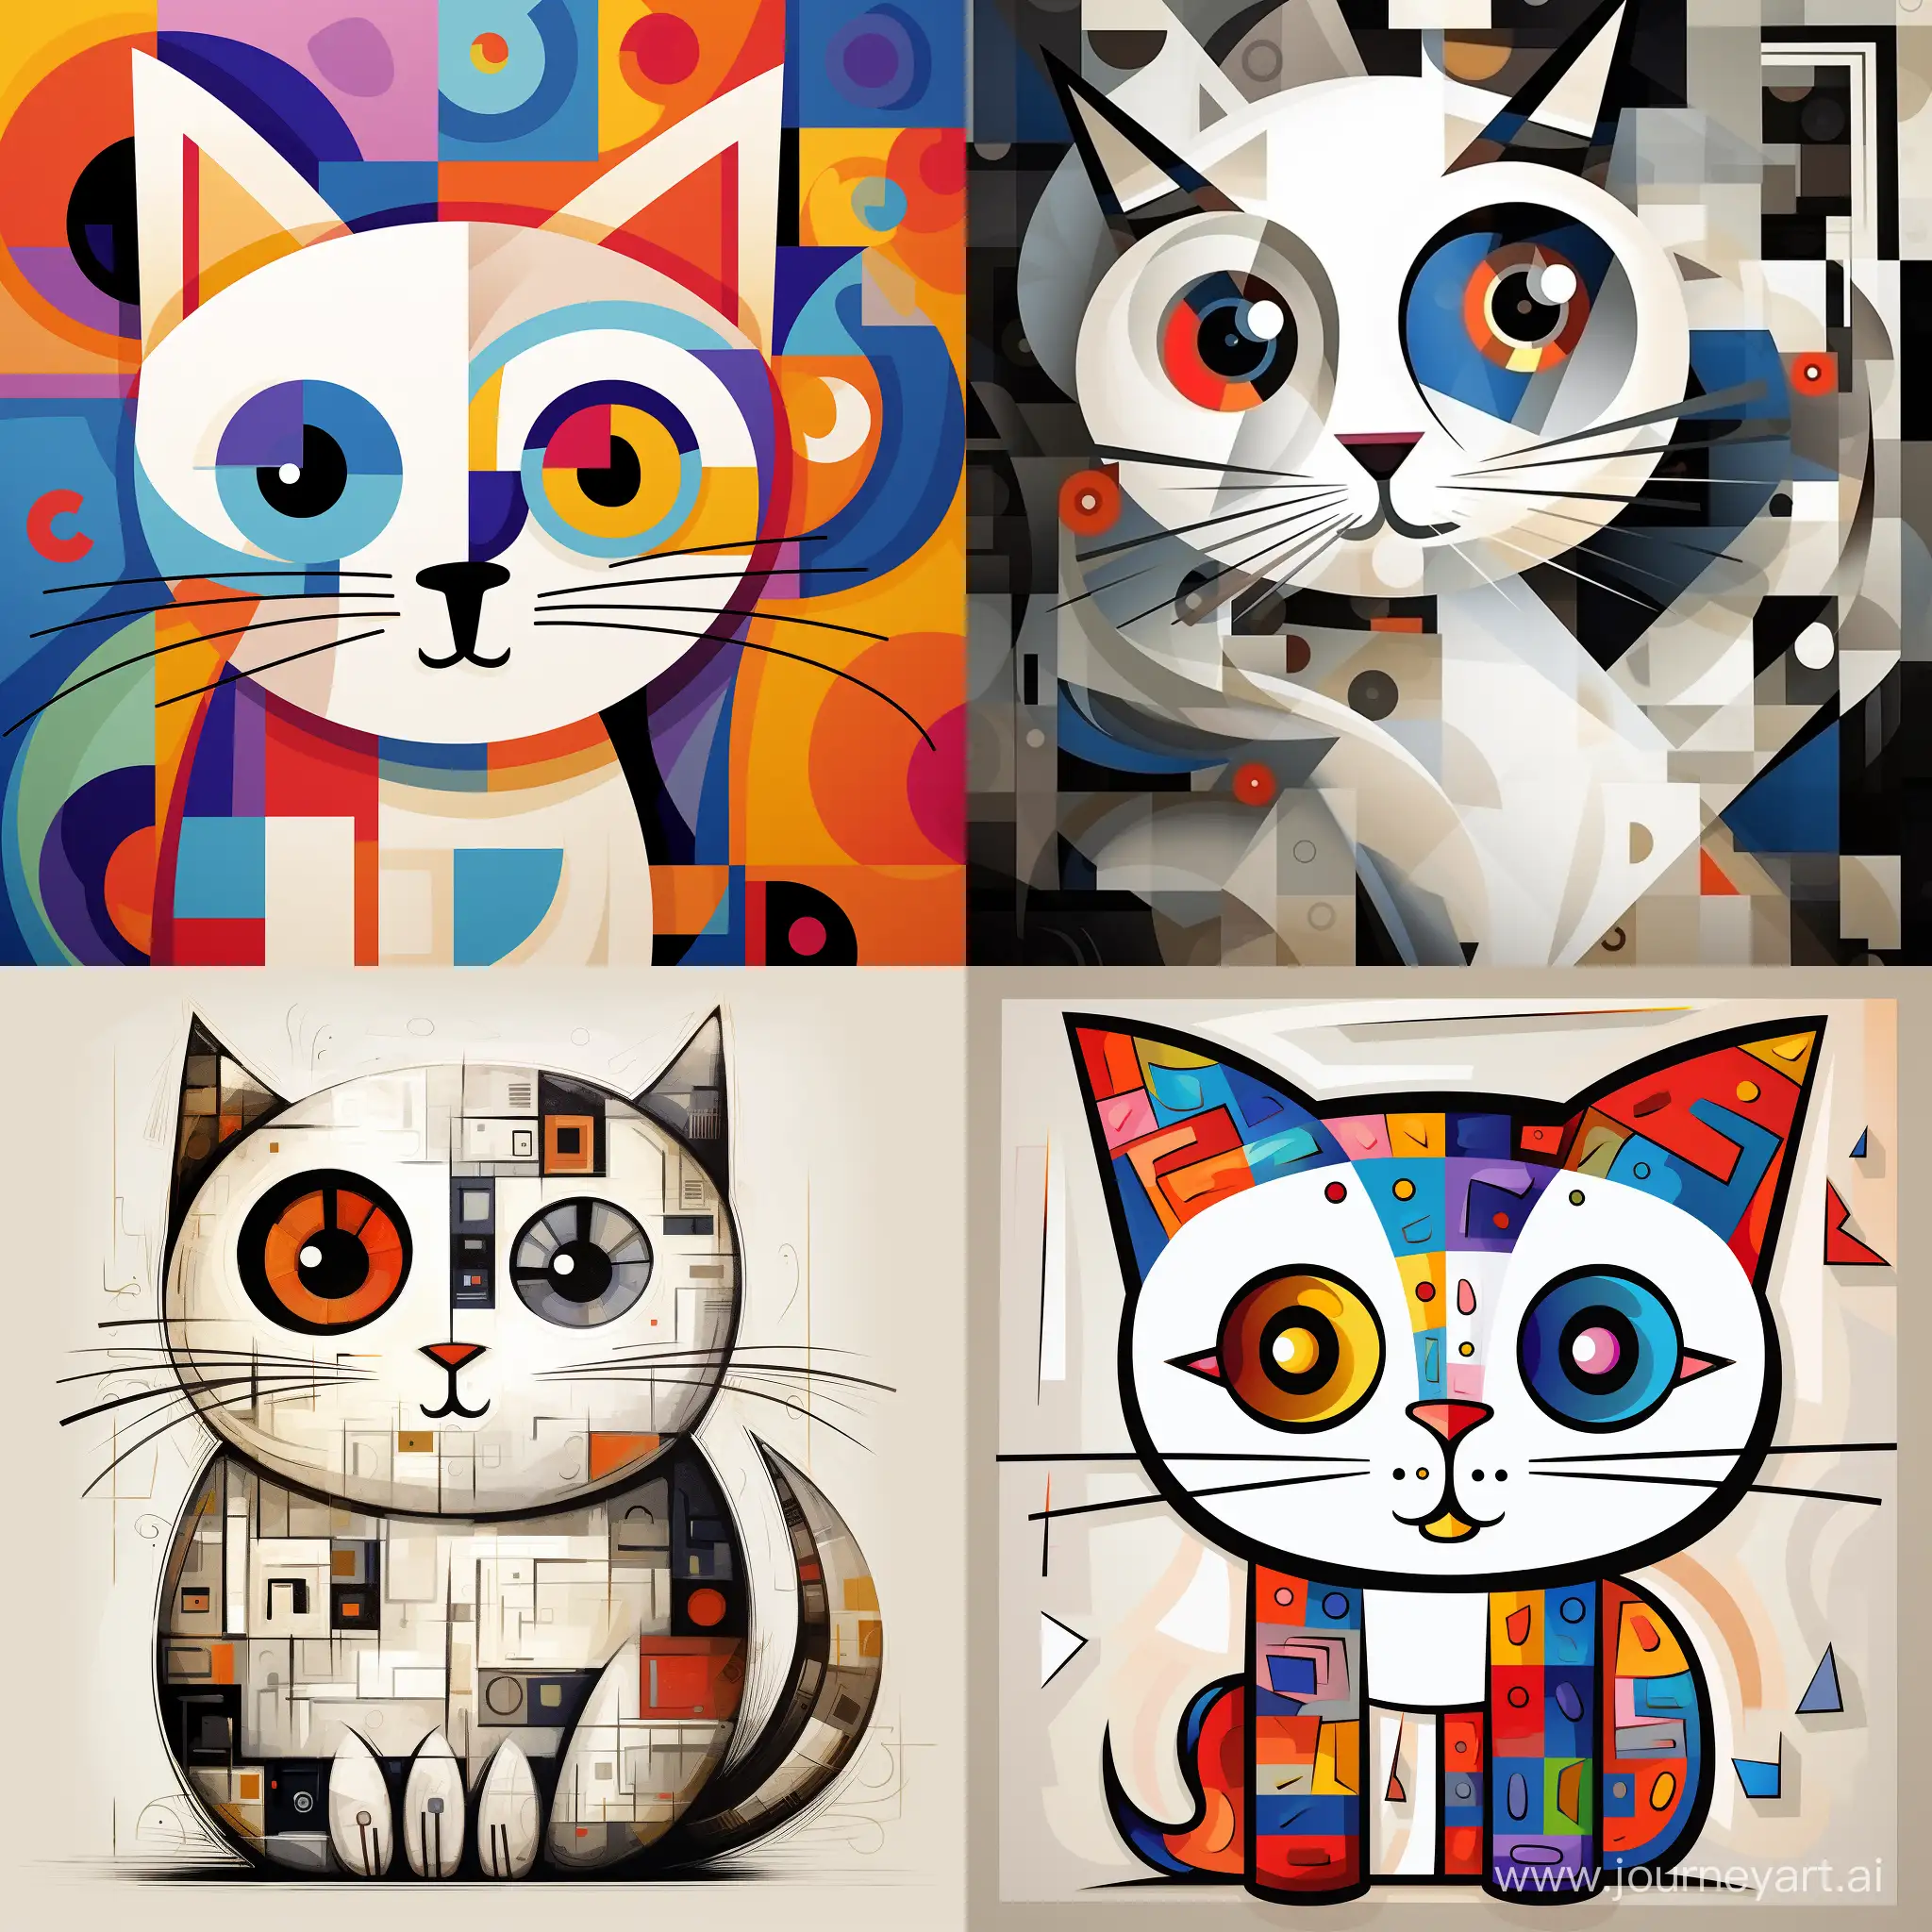 Charming-Cubist-Depiction-of-Simon-the-Cat-with-Big-Eyes